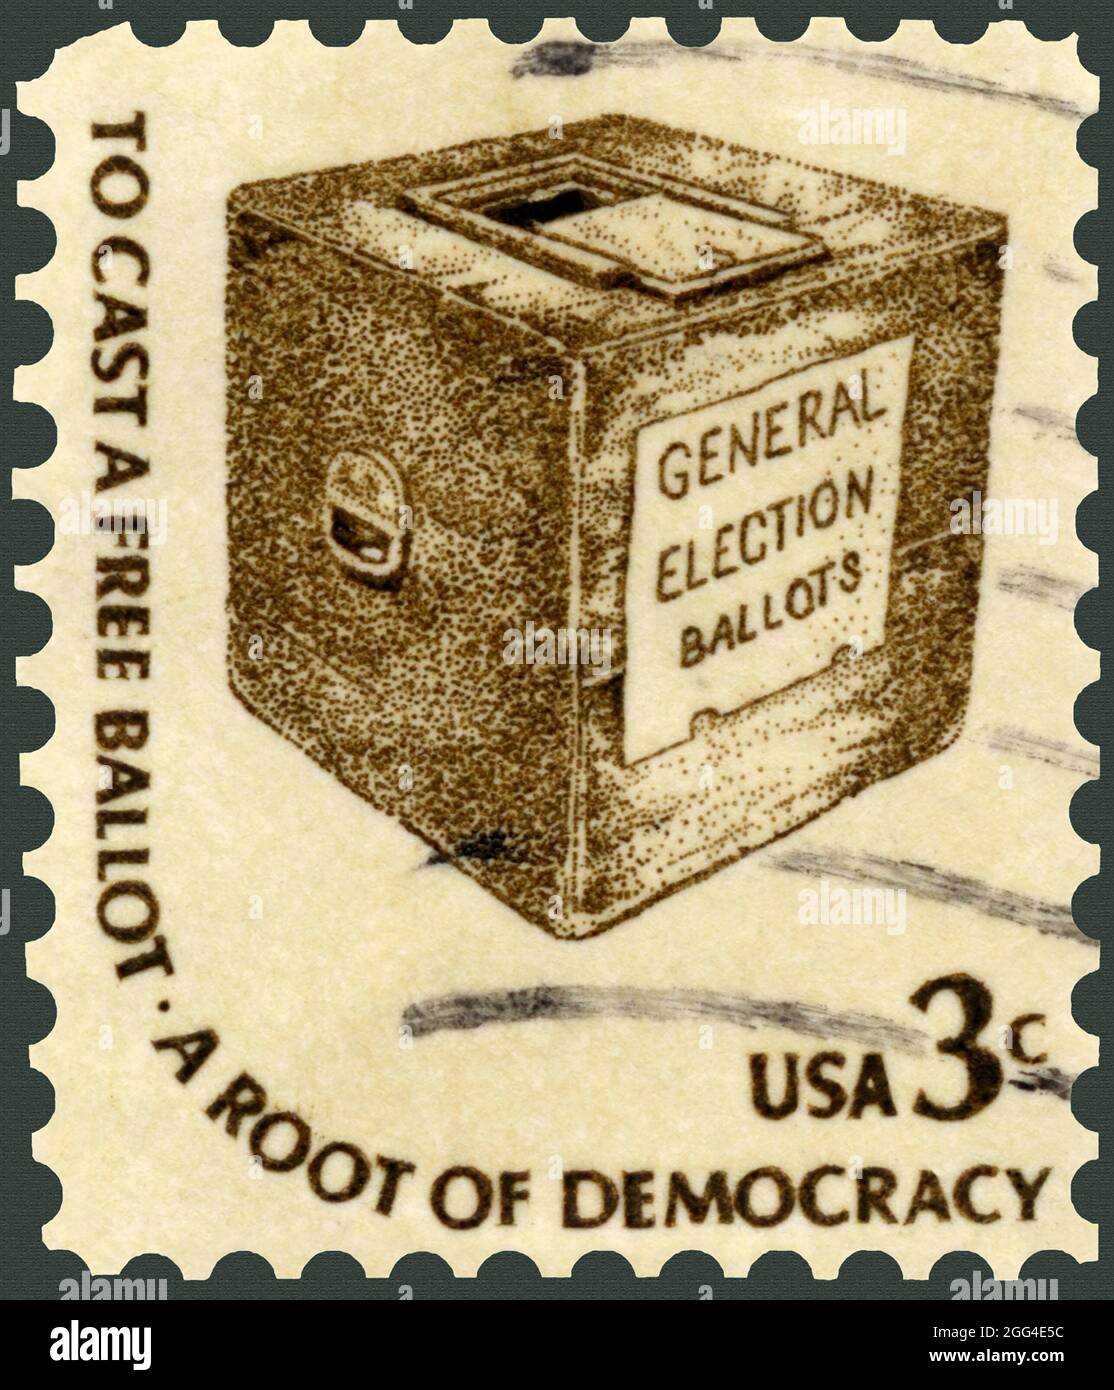 Ballot Box stamp issued 1977. Stock Photo